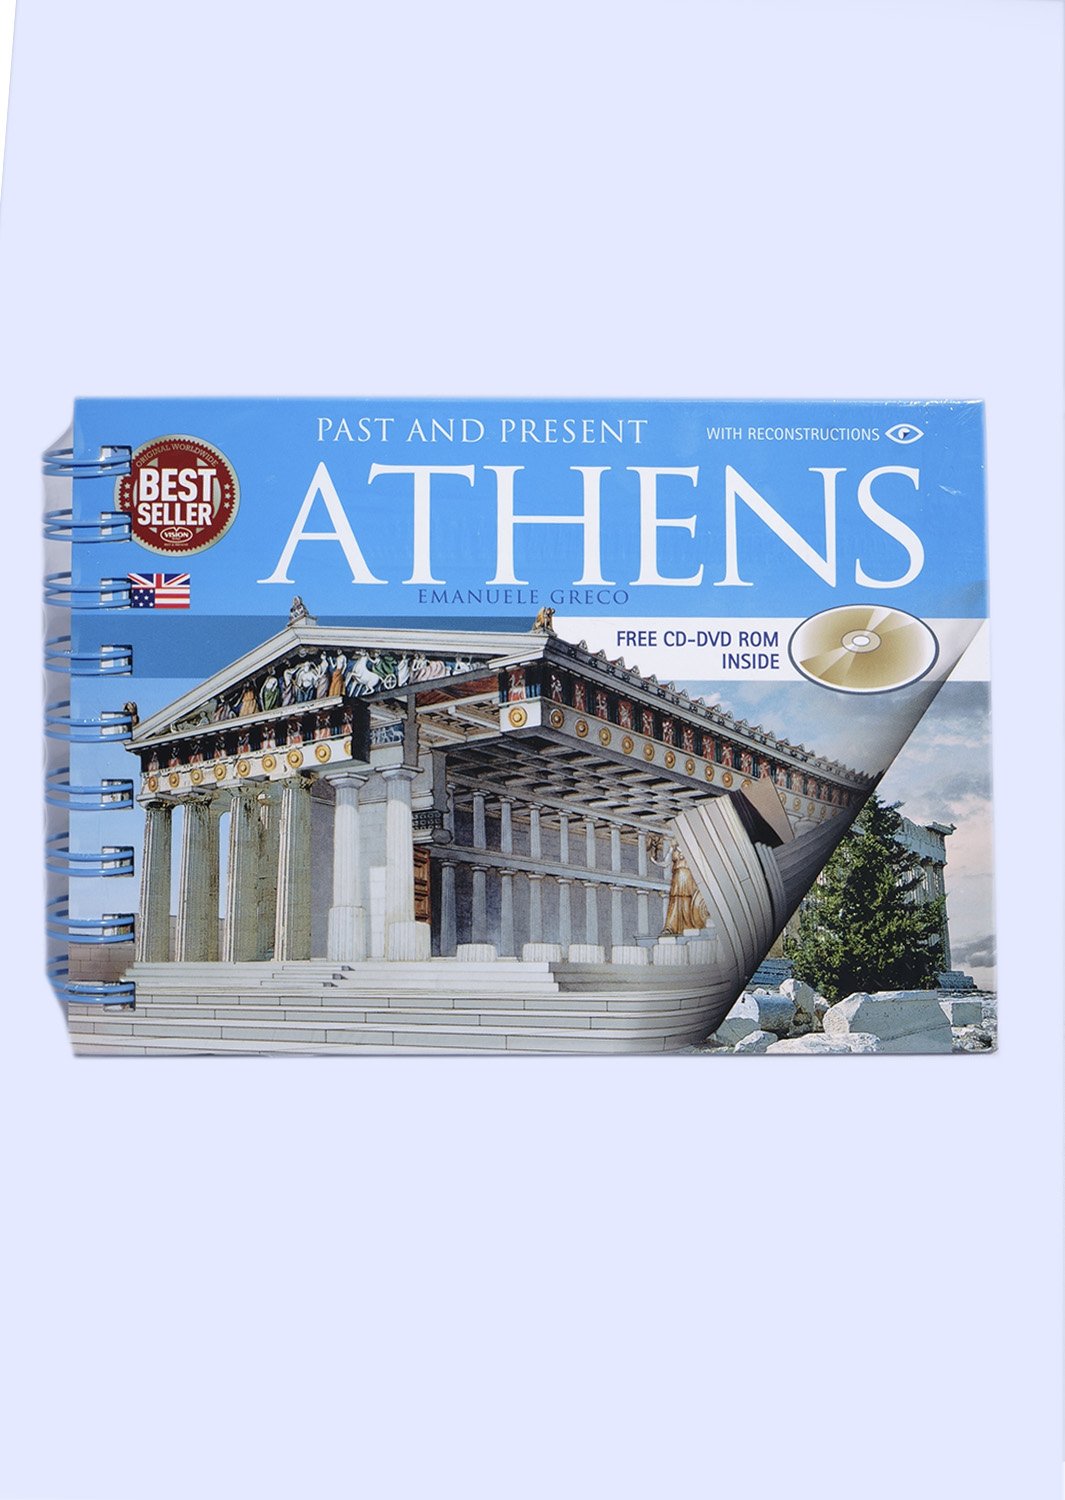 Past and present of Athens book